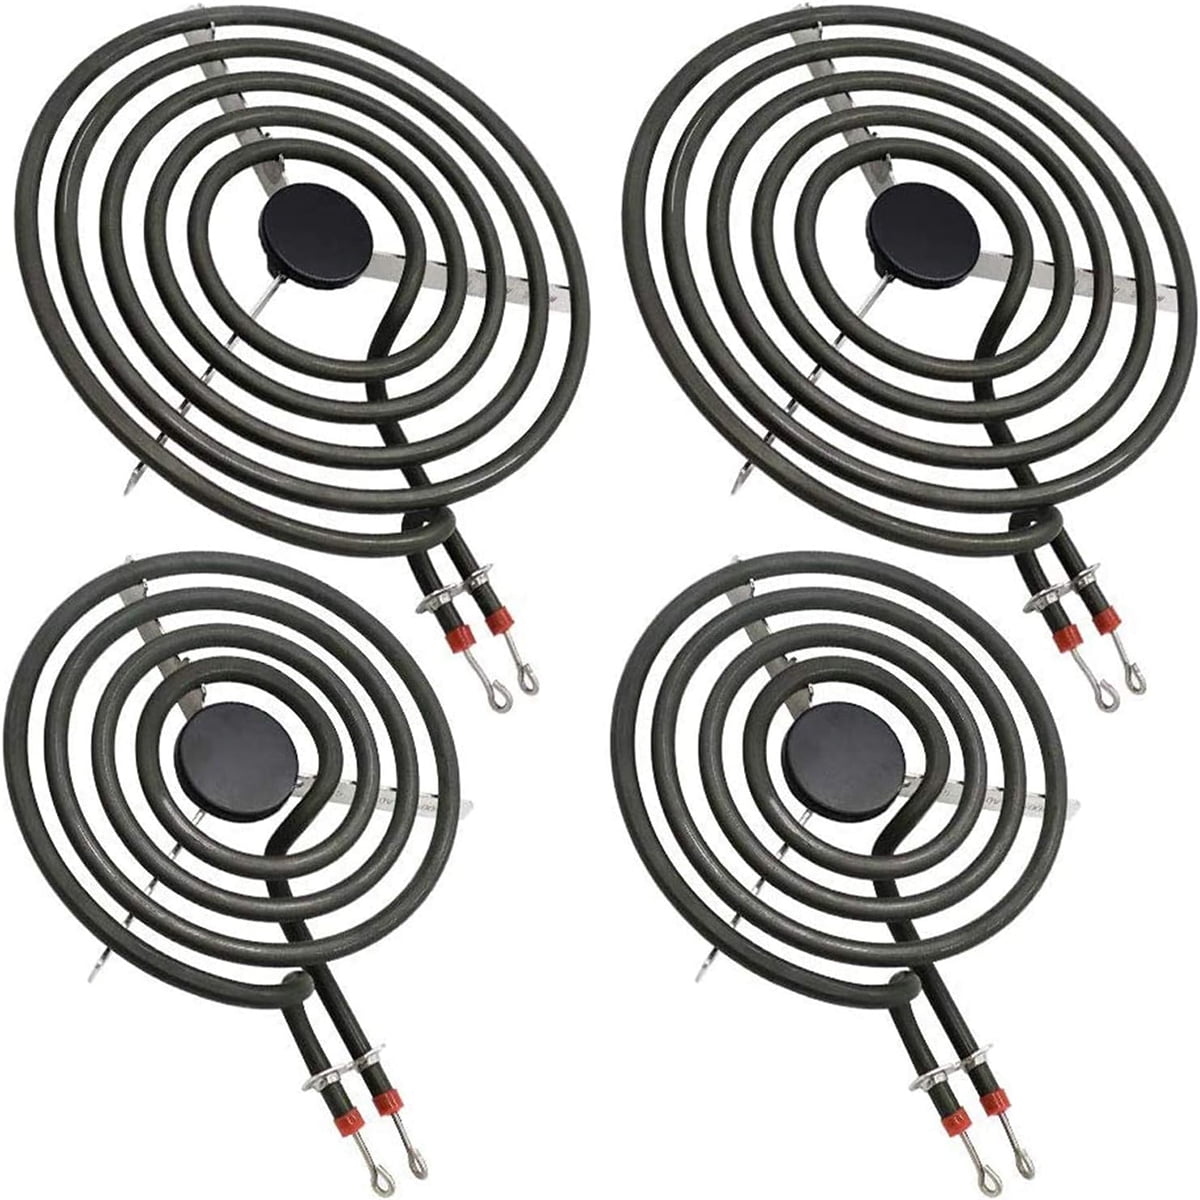 MP15YA 660532 6 Coil Electric Range Burner Element For Whirlpool, Maytag  more